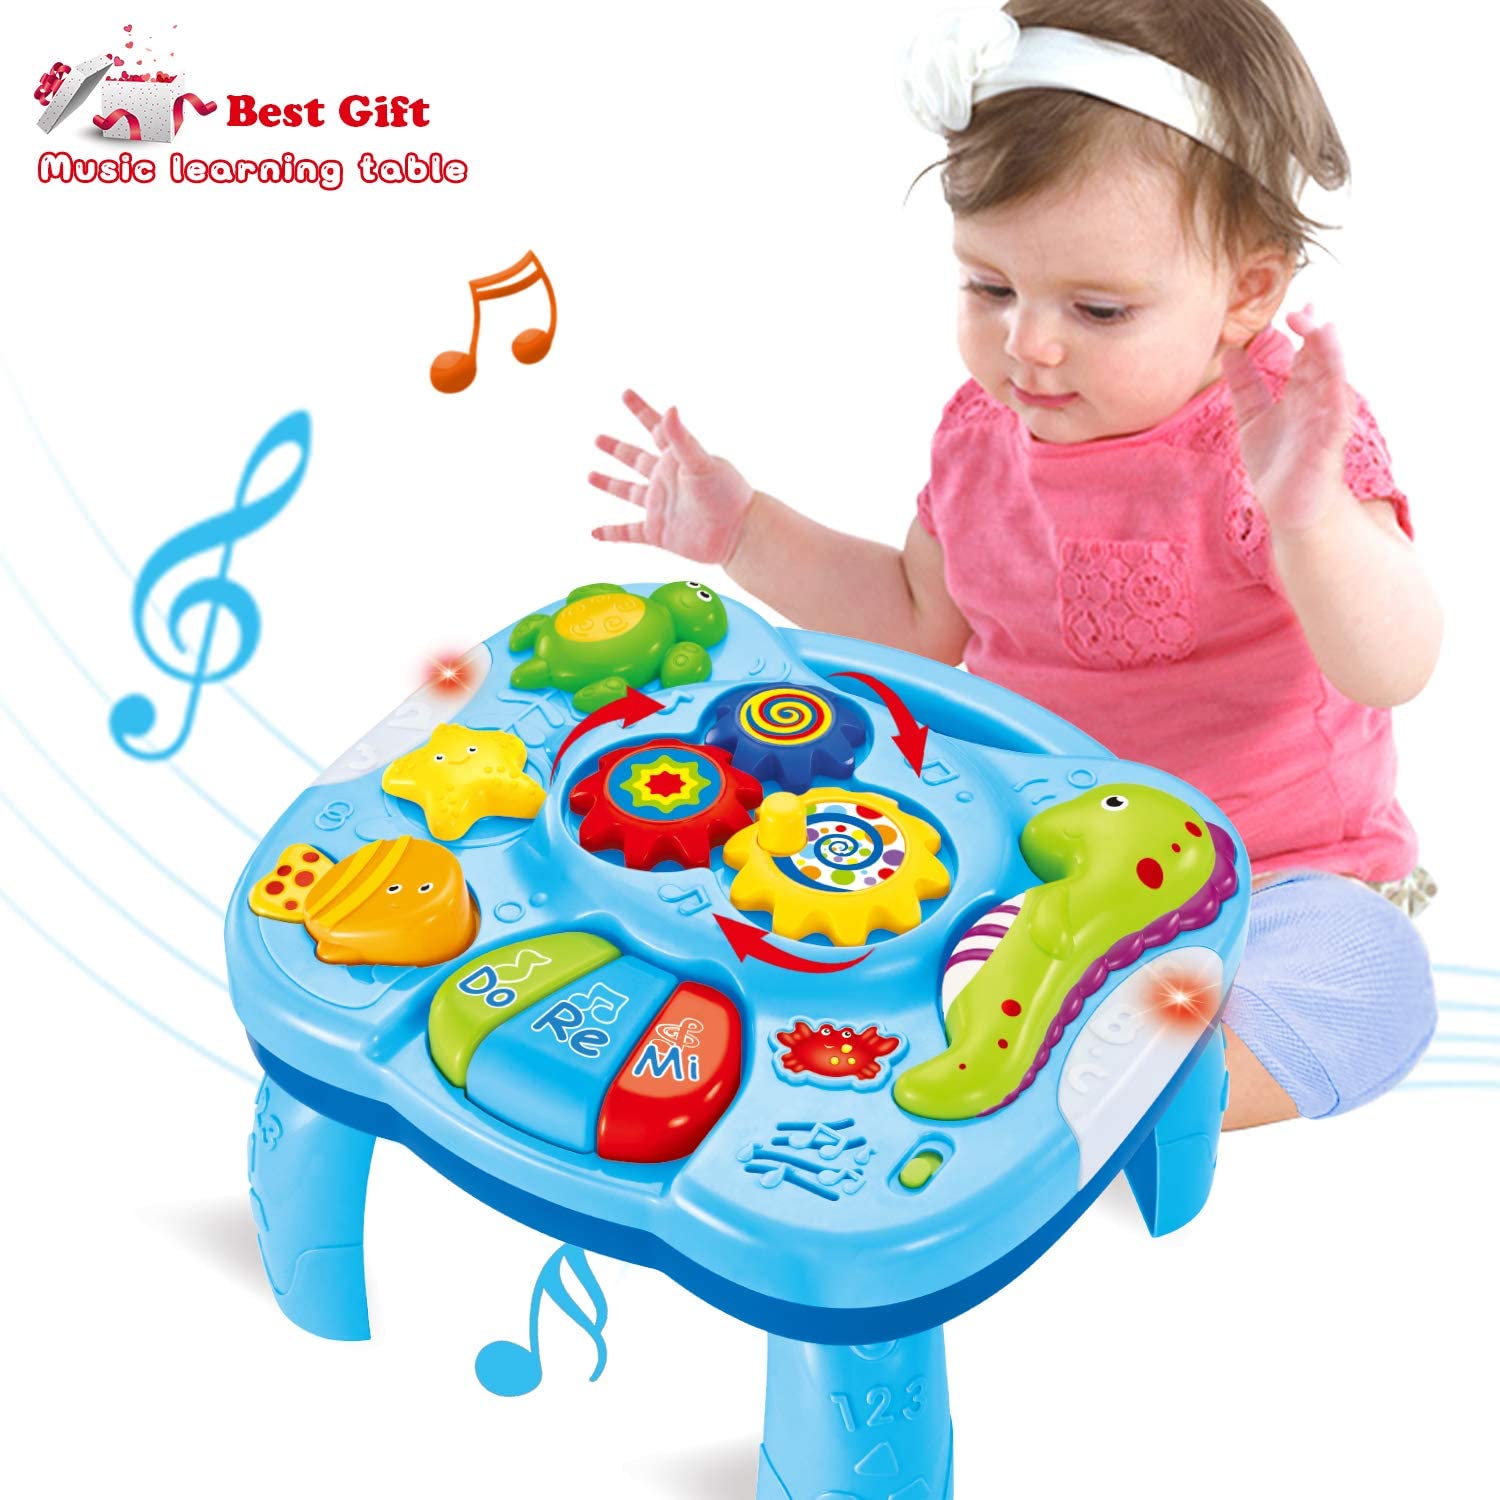 ACTRINIC Musical Learning Table Baby Toys 6 to 12 Months Early Education Music Activity Center BEST Entertaining & Game Table Toddlers Toys for 1 2 3 Year Old Song&Lighting&Sound Best Gift